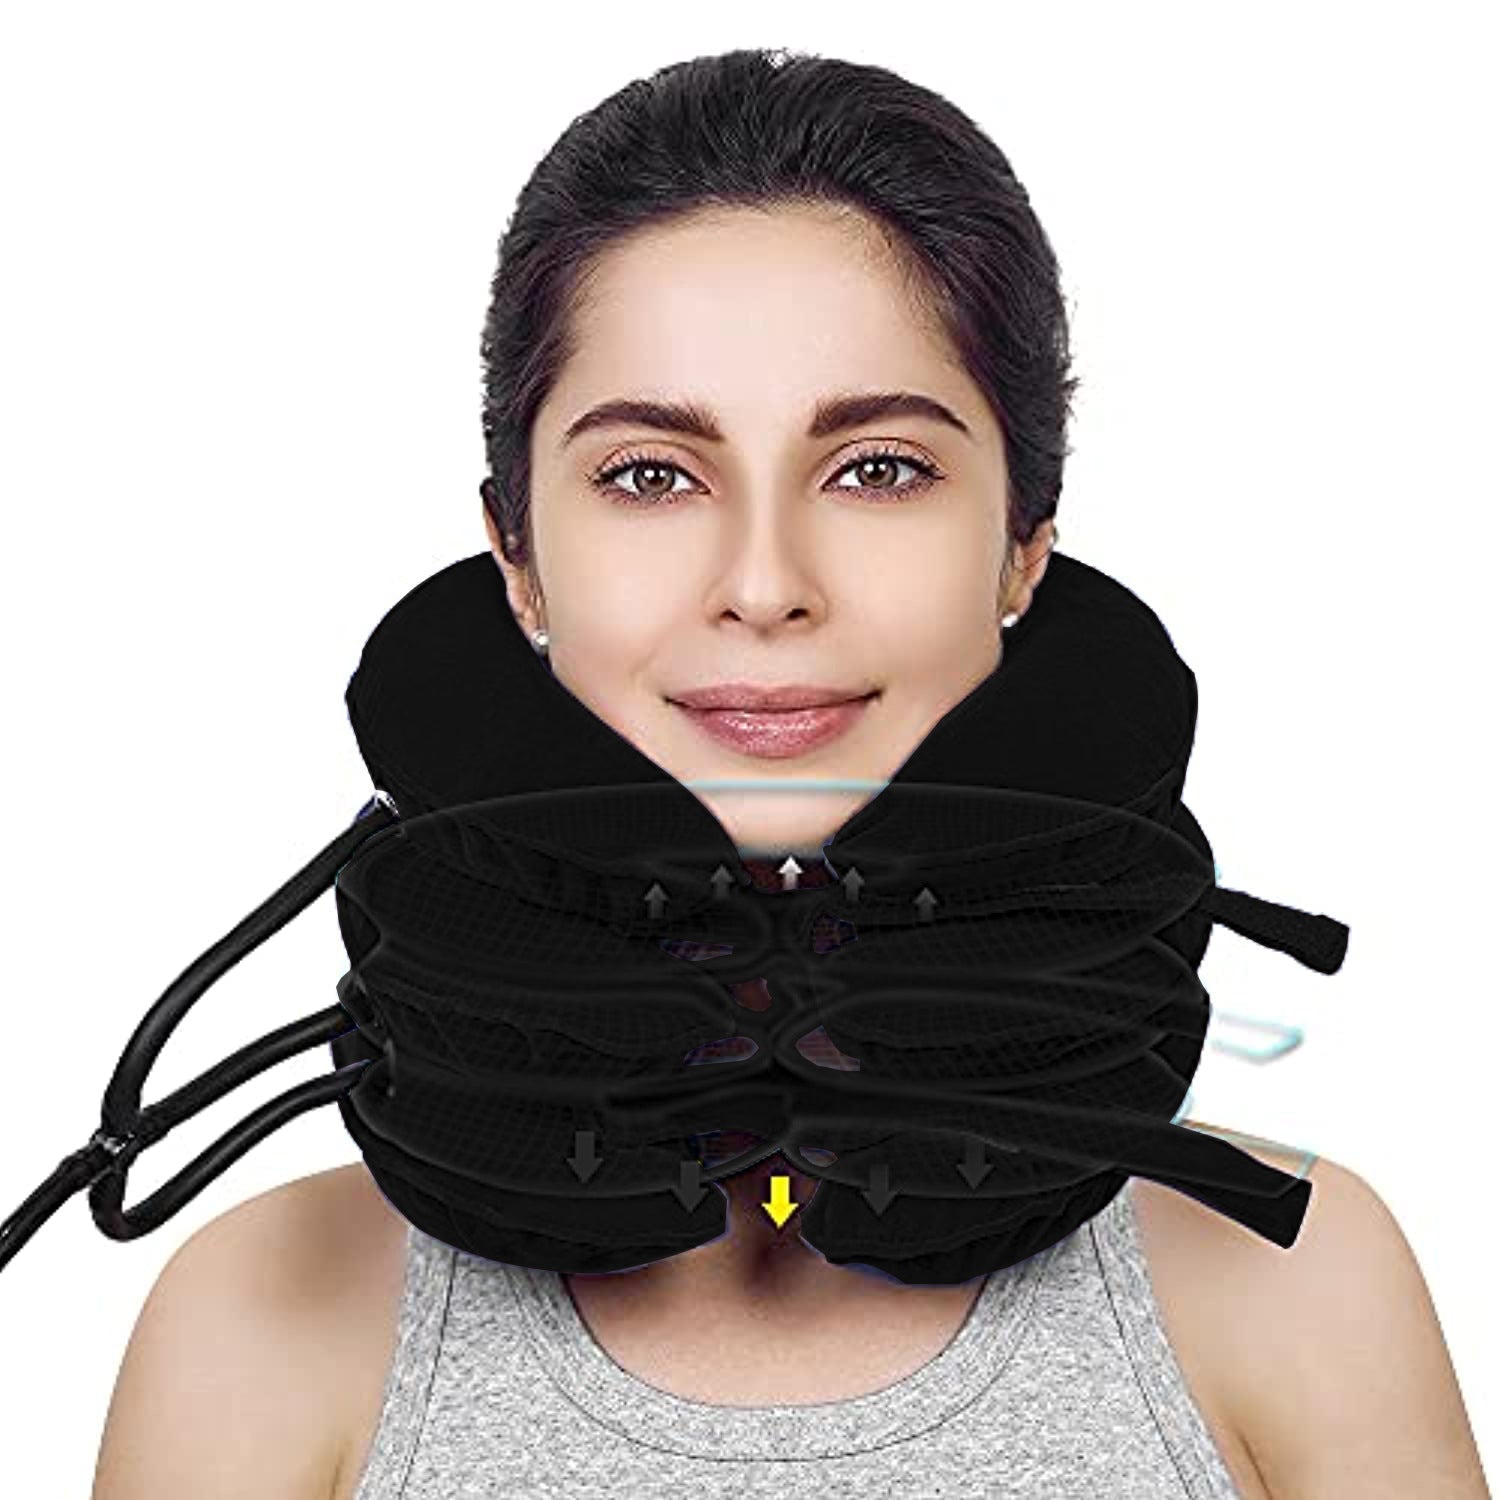 Cervical Traction Device Neck Support Pillow | Inflatable Adjustable Neck Stretcher | Three-Layer Inflatable Neck Pillow